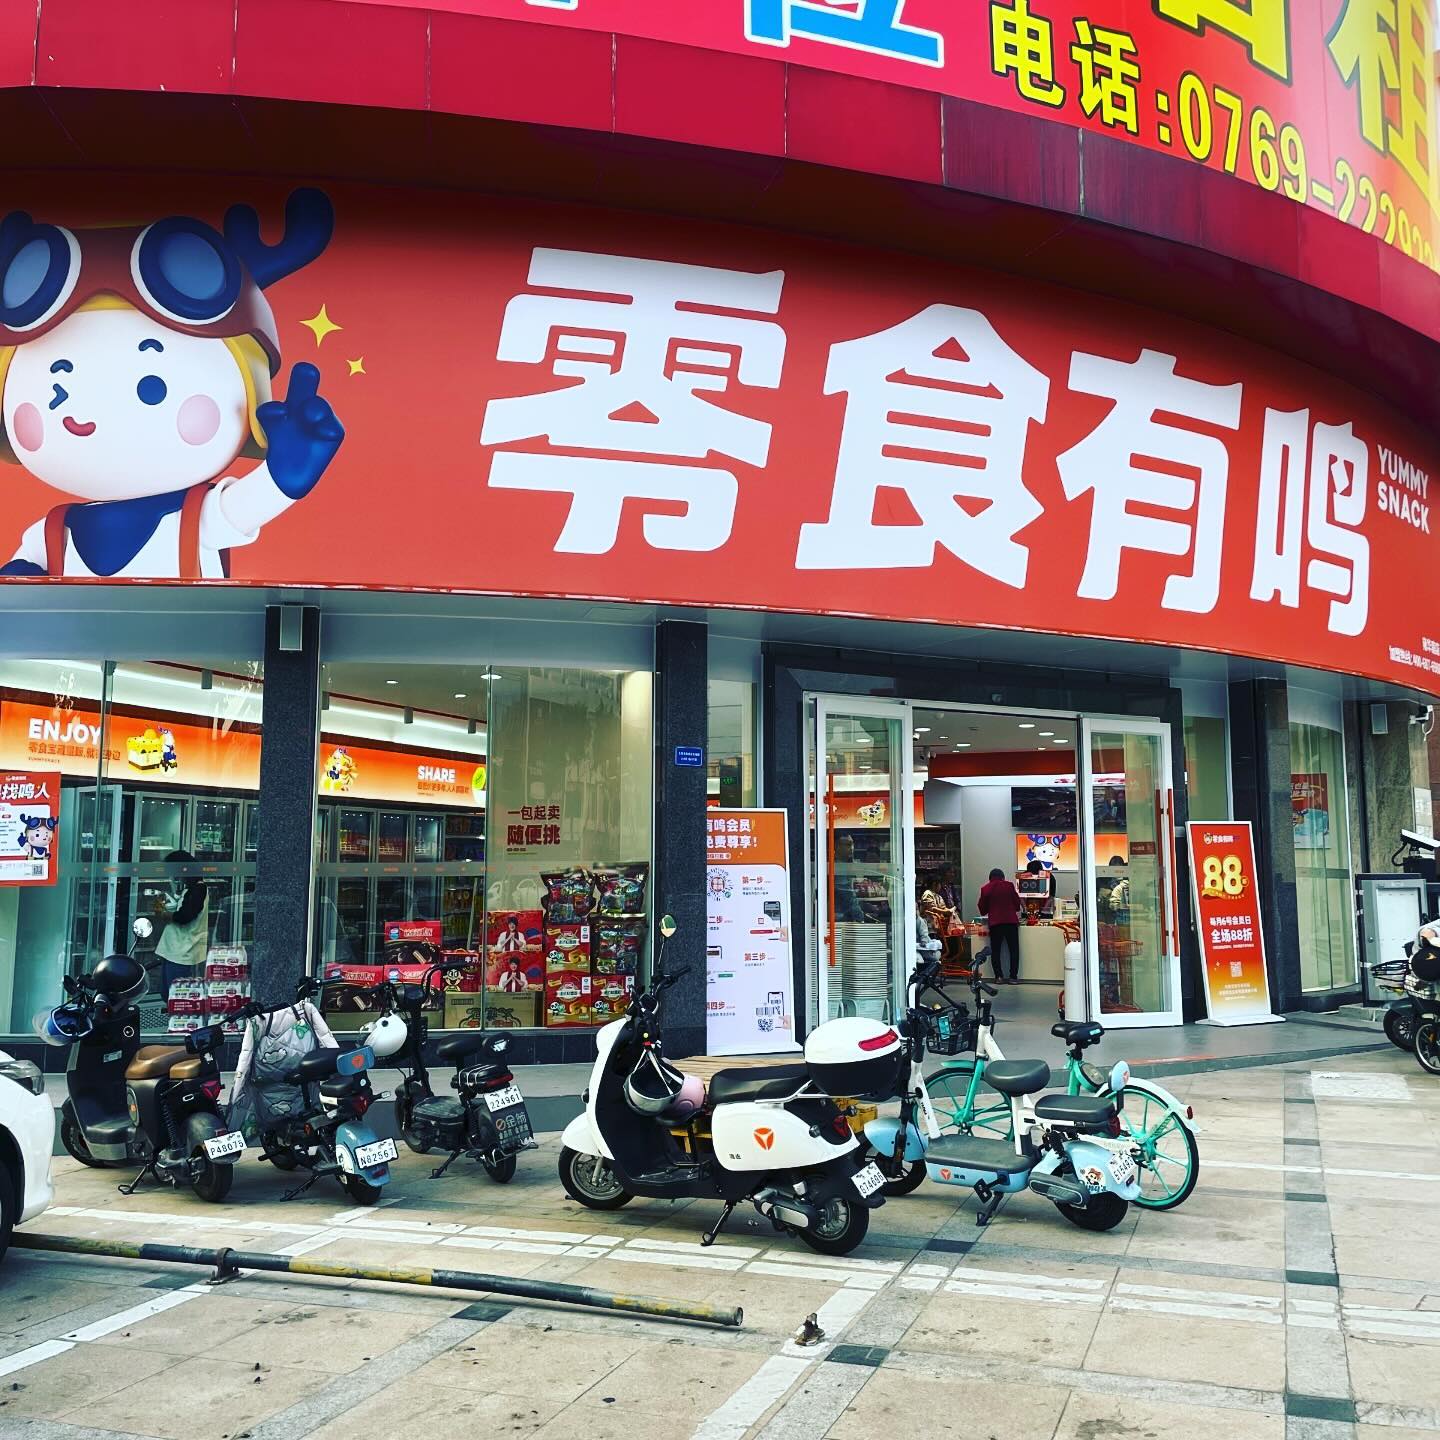 New shop near the office, will this business model work? We will wait and see! #Dongguan